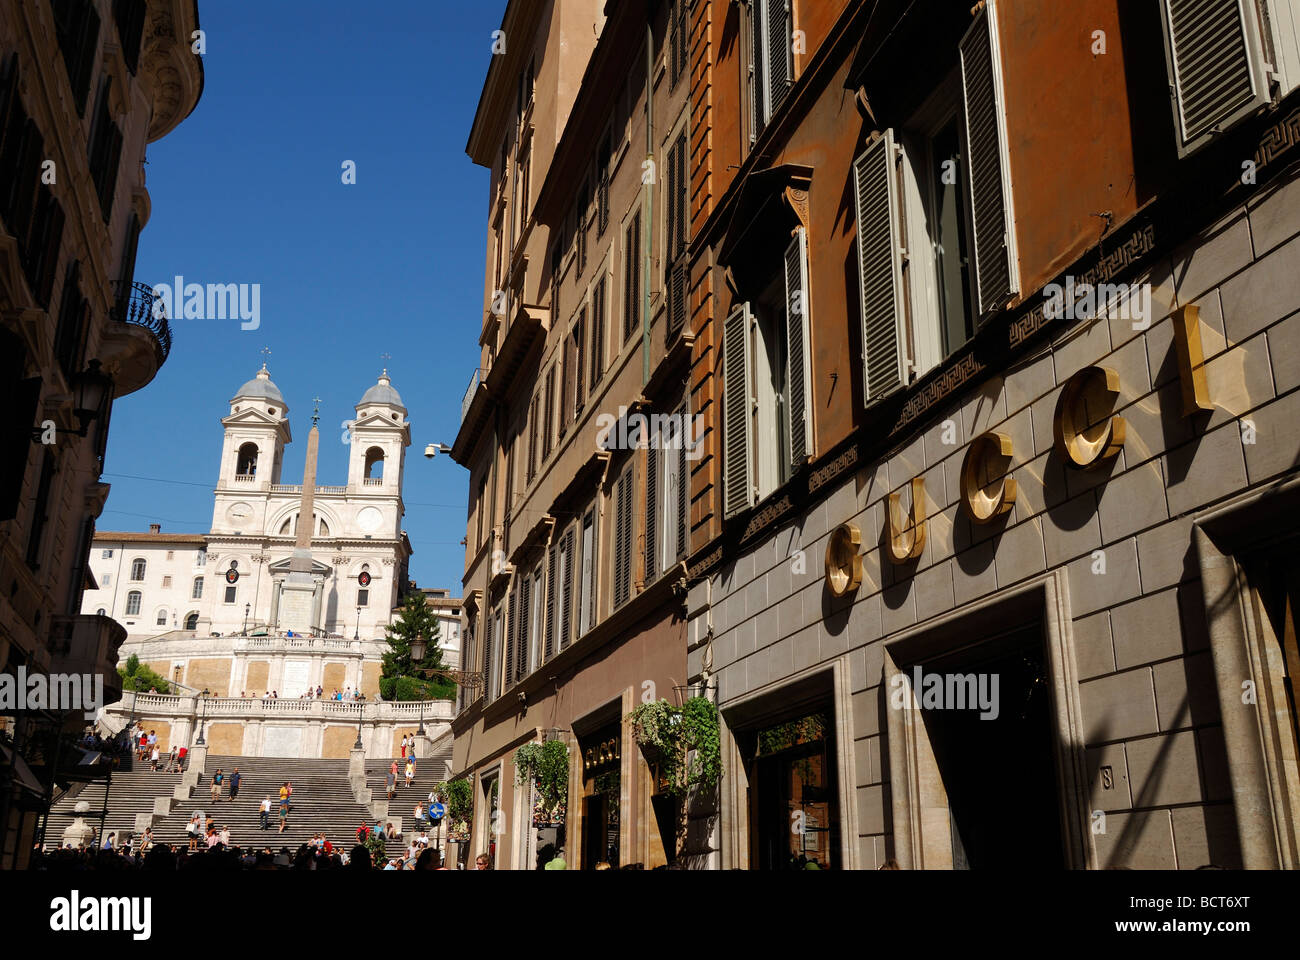 Via Condotti High Resolution Stock Photography and Images - Alamy